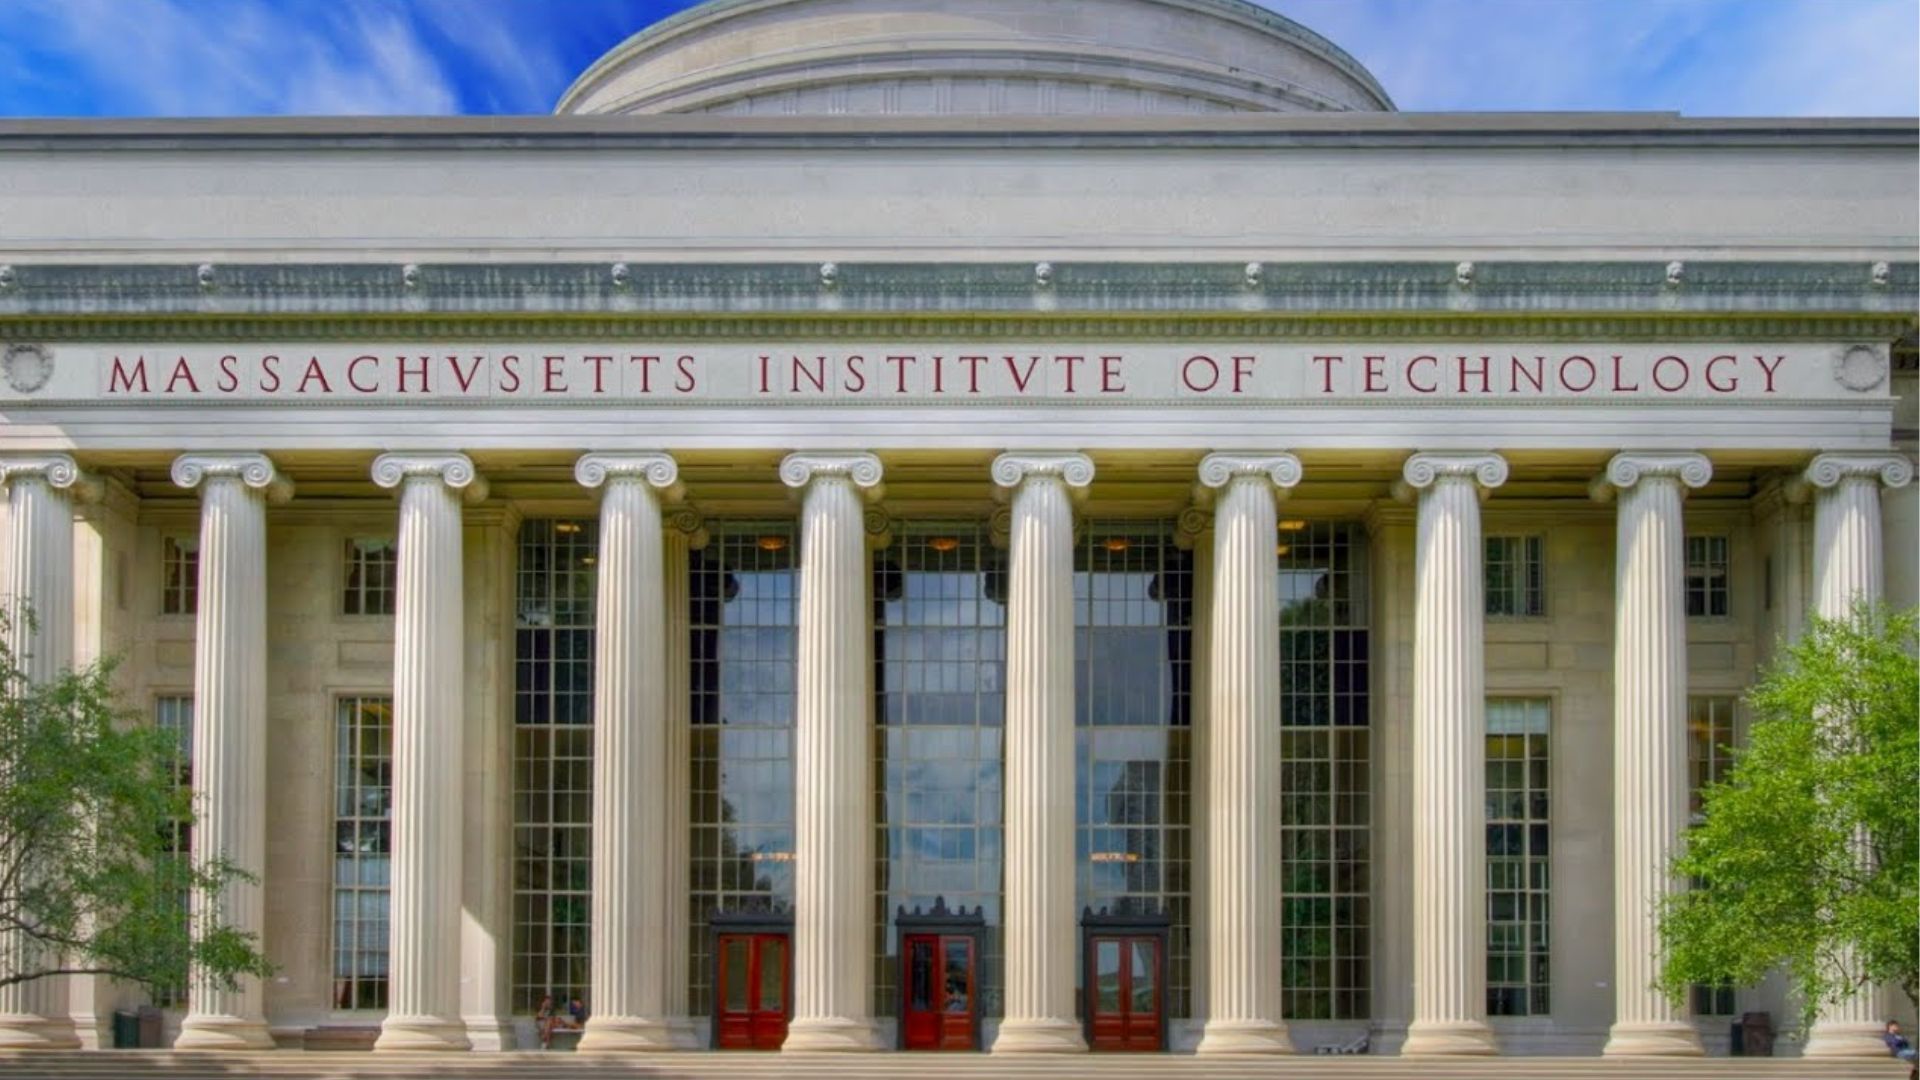 Black Panther filming locations- Massachusetts Institute of Technology